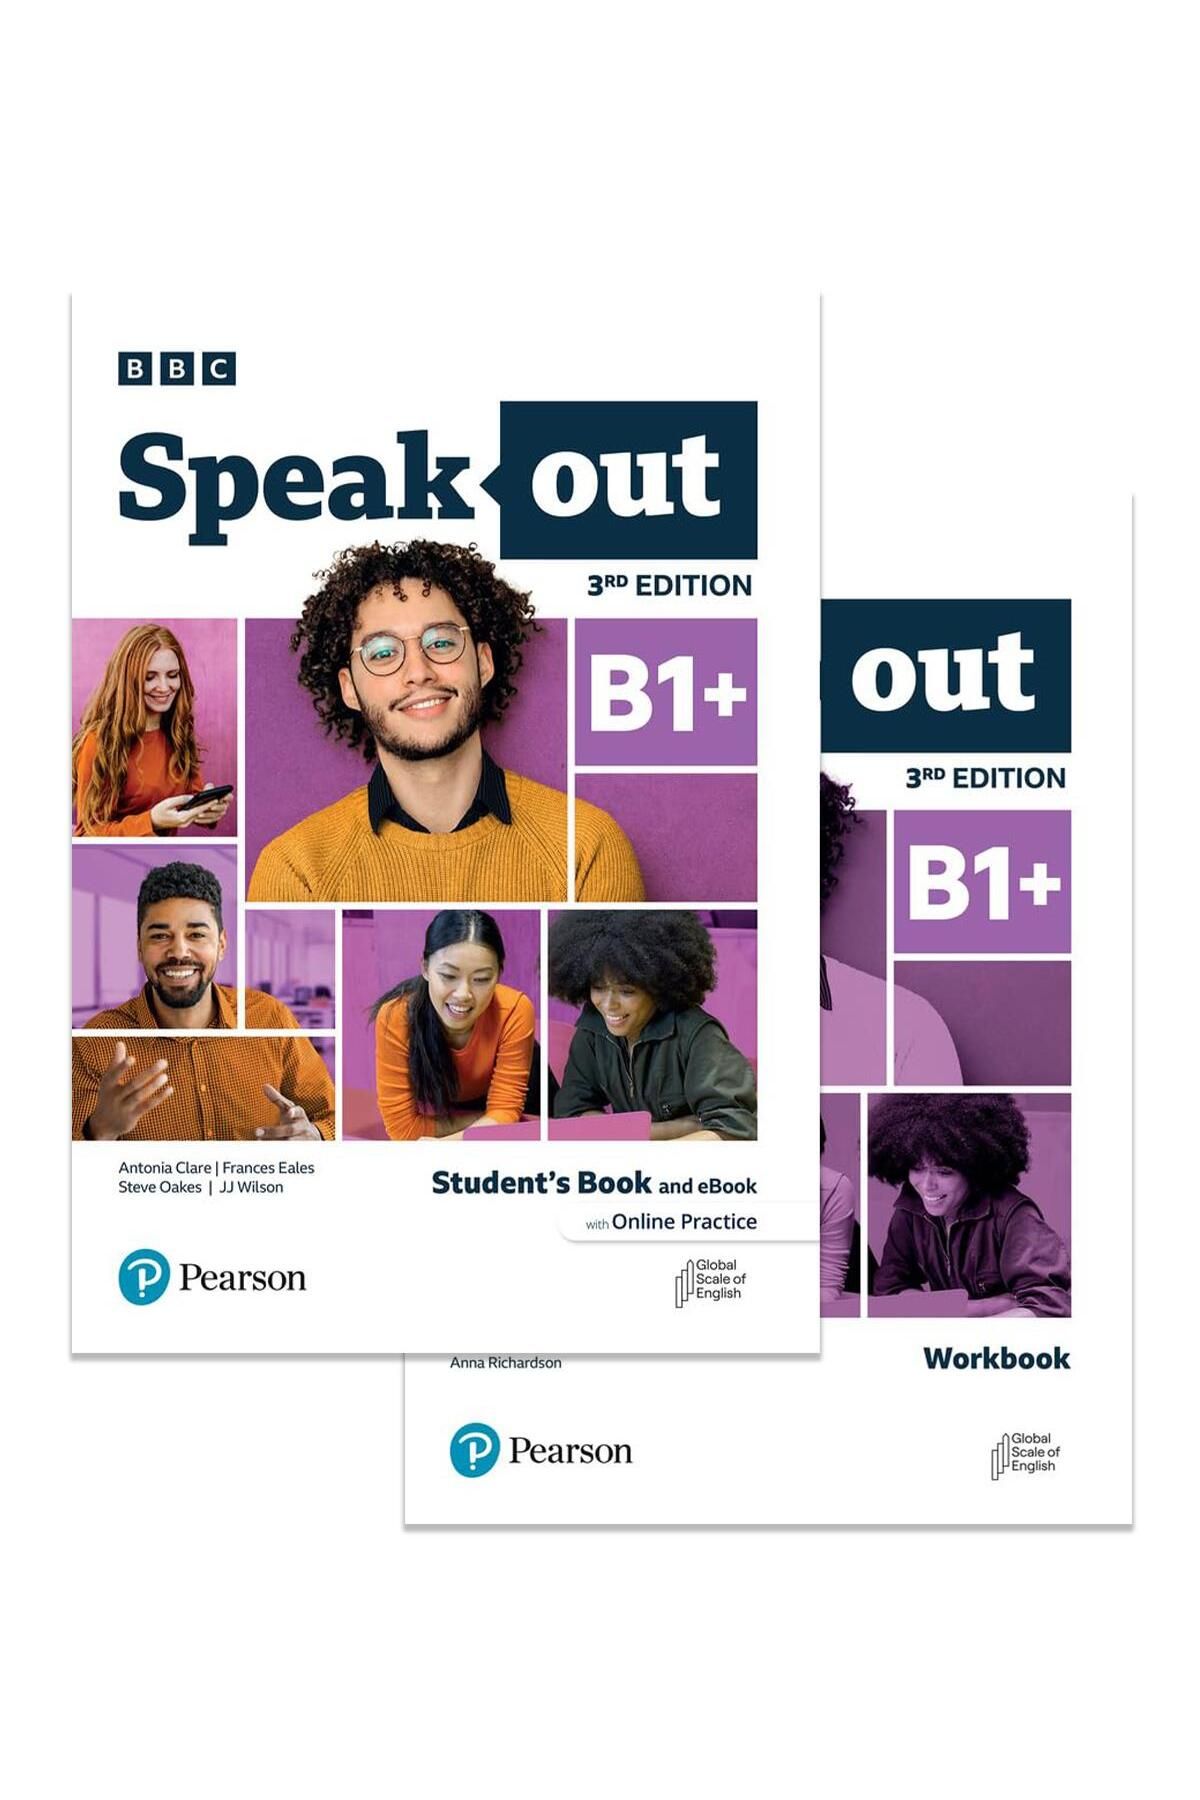 Pearson Speakout B1 Student Book And Ebook With Online Practice Workbook With Key (3RD EDİTİON)